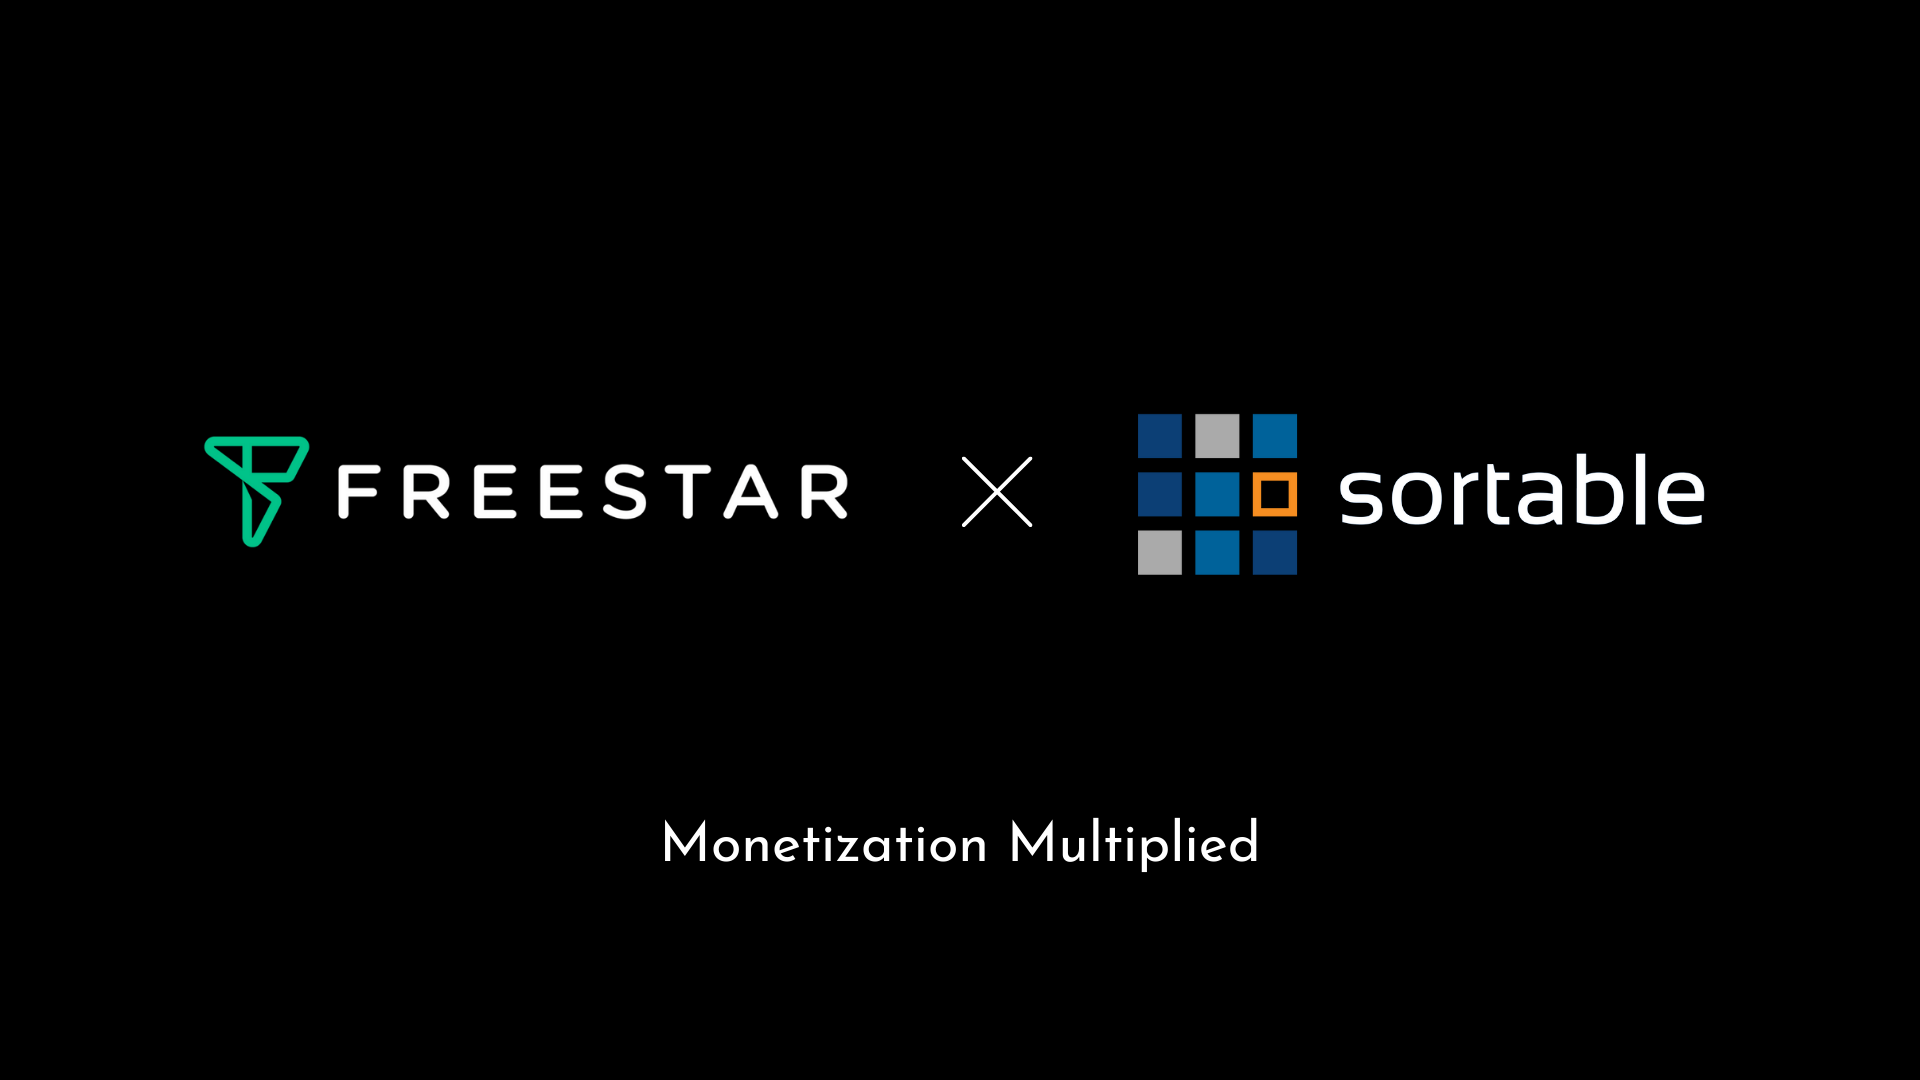 Freestar Announces Acquisition of Sortable Bolstering Its Monetization Solutions and Analytics Capabilities